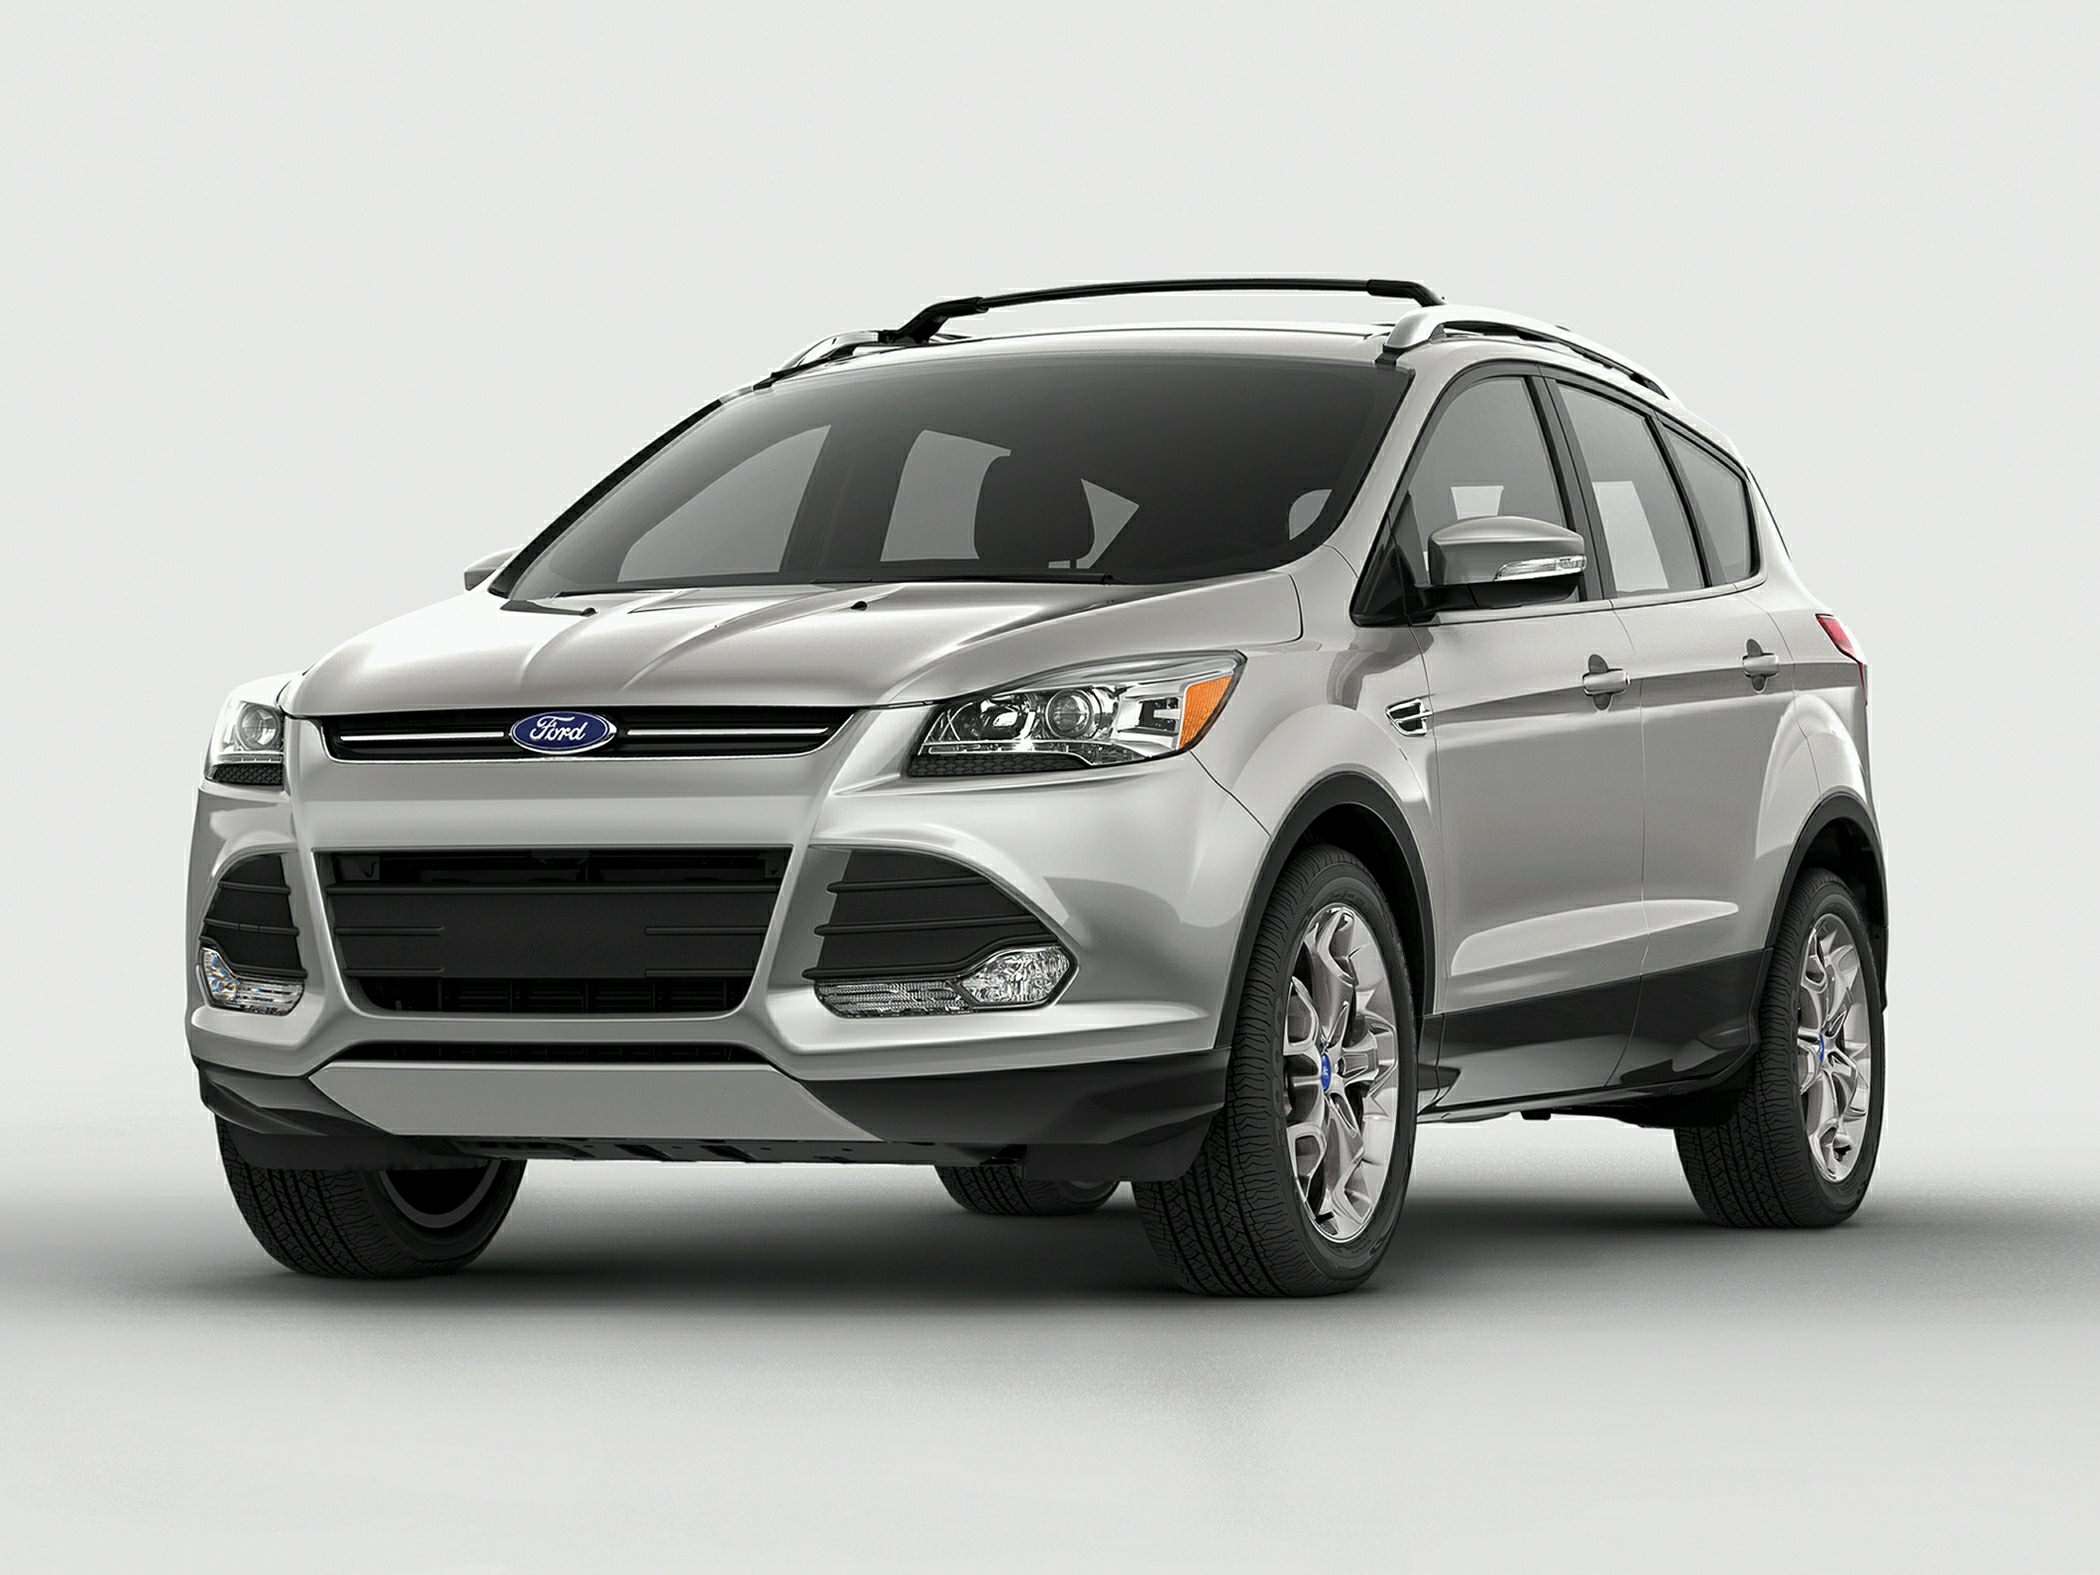 2015 ford escape price photos reviews amp features new car invoice prices 2014